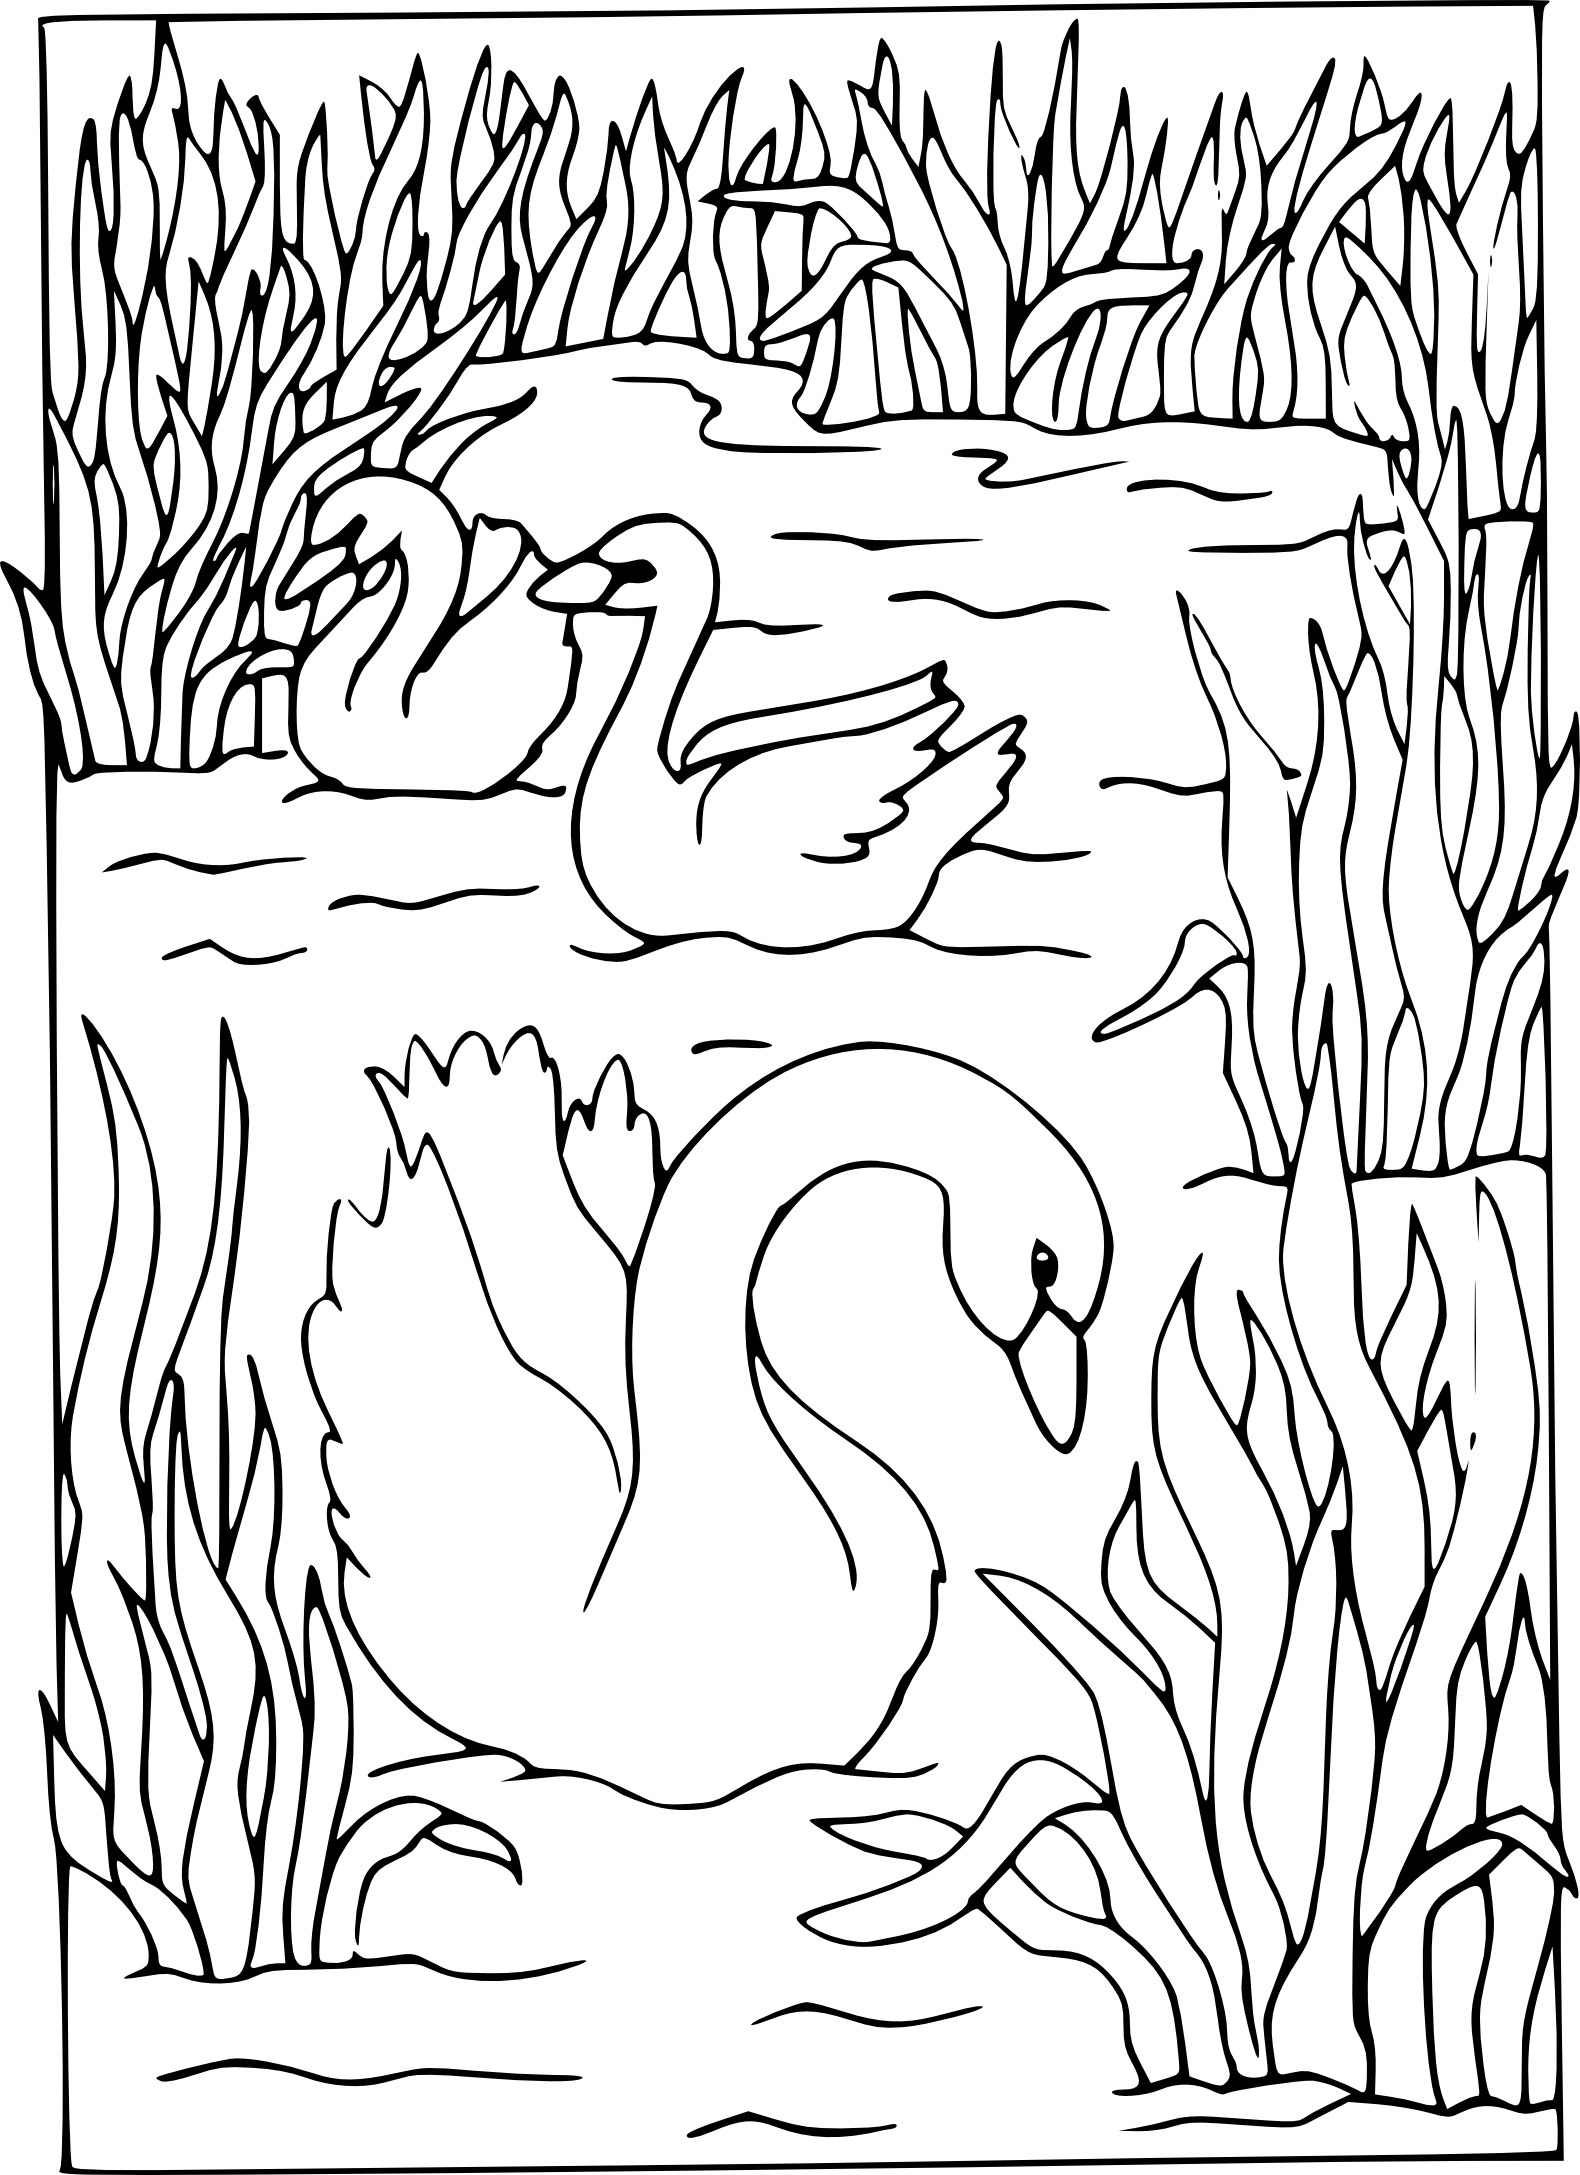 Swans In A Lake coloring page